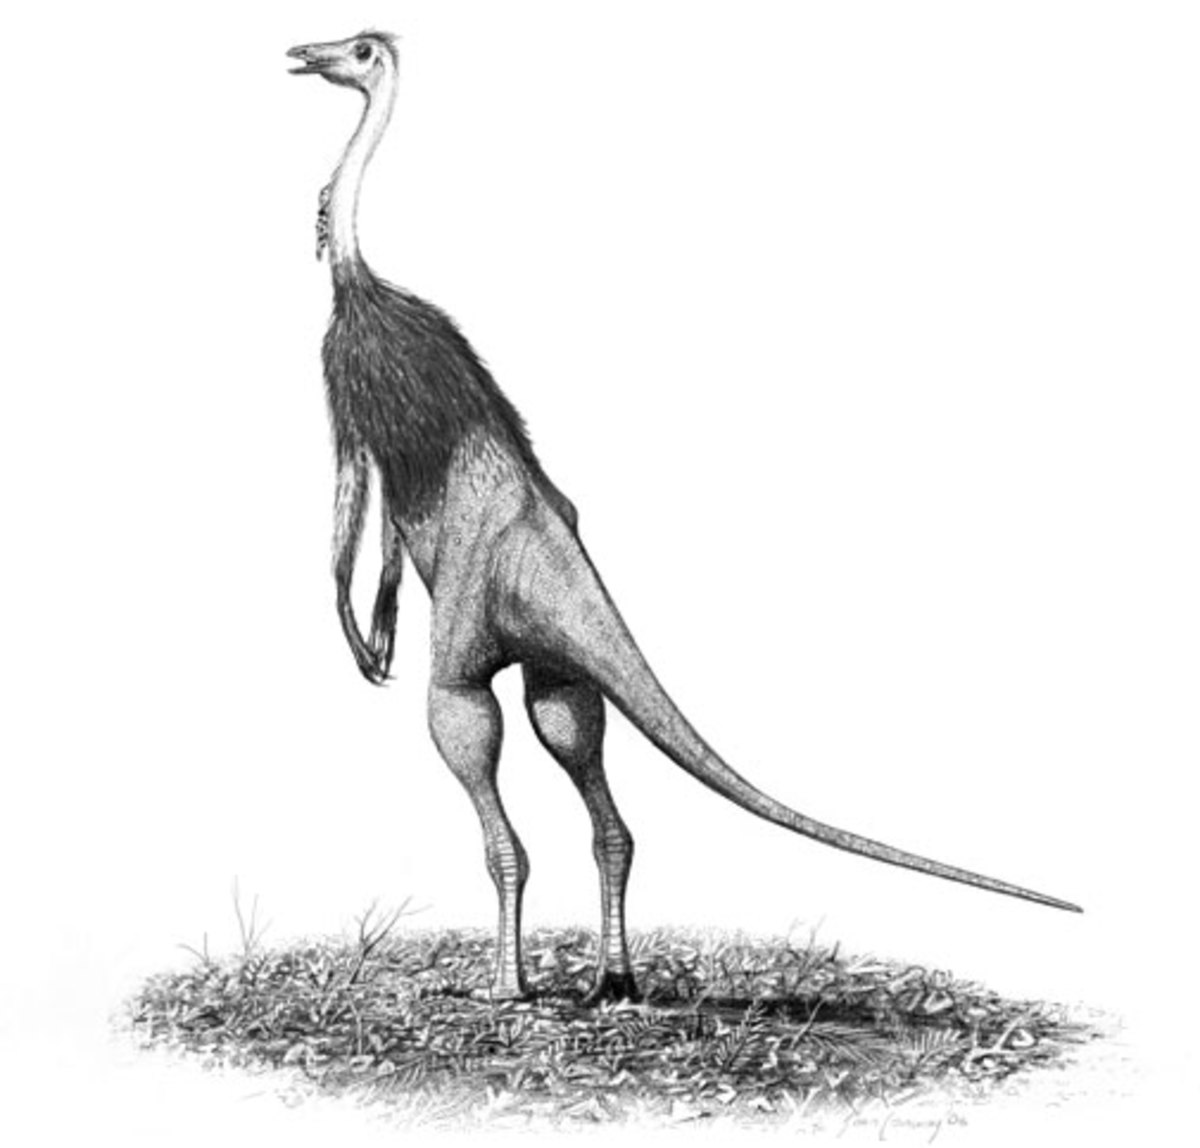 Facts on The Struthiomimus & Lesothosaurus